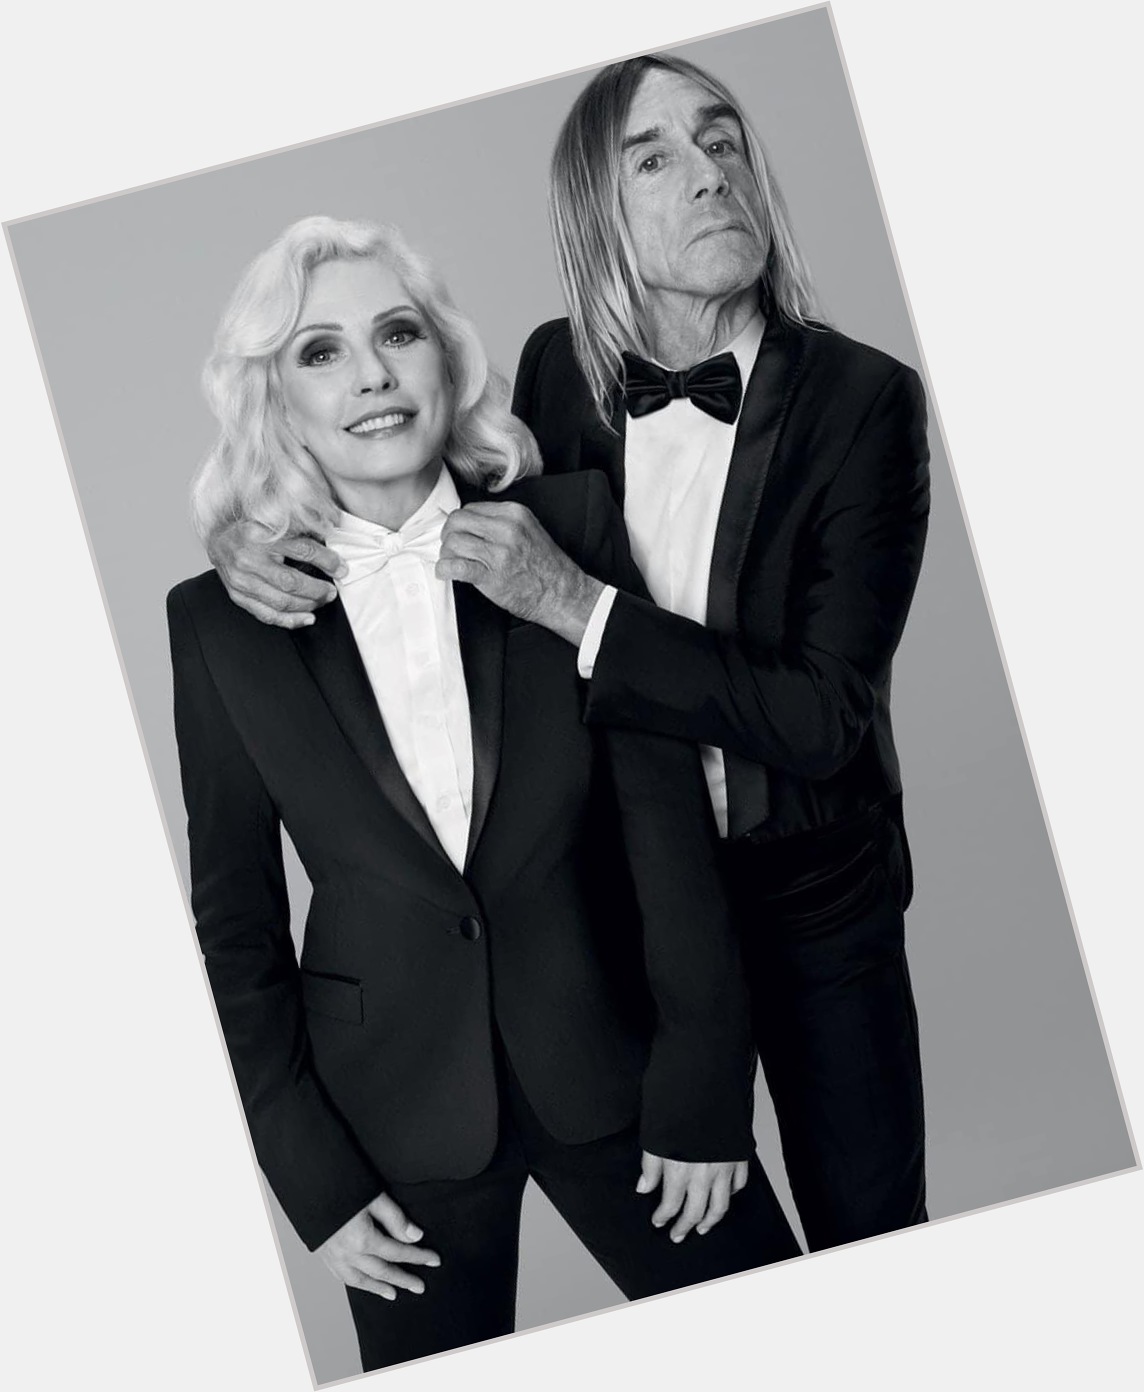 Happy 75th Birthday Iggy Pop. Seen here with Debbie Harry. Both still cool as f**k 